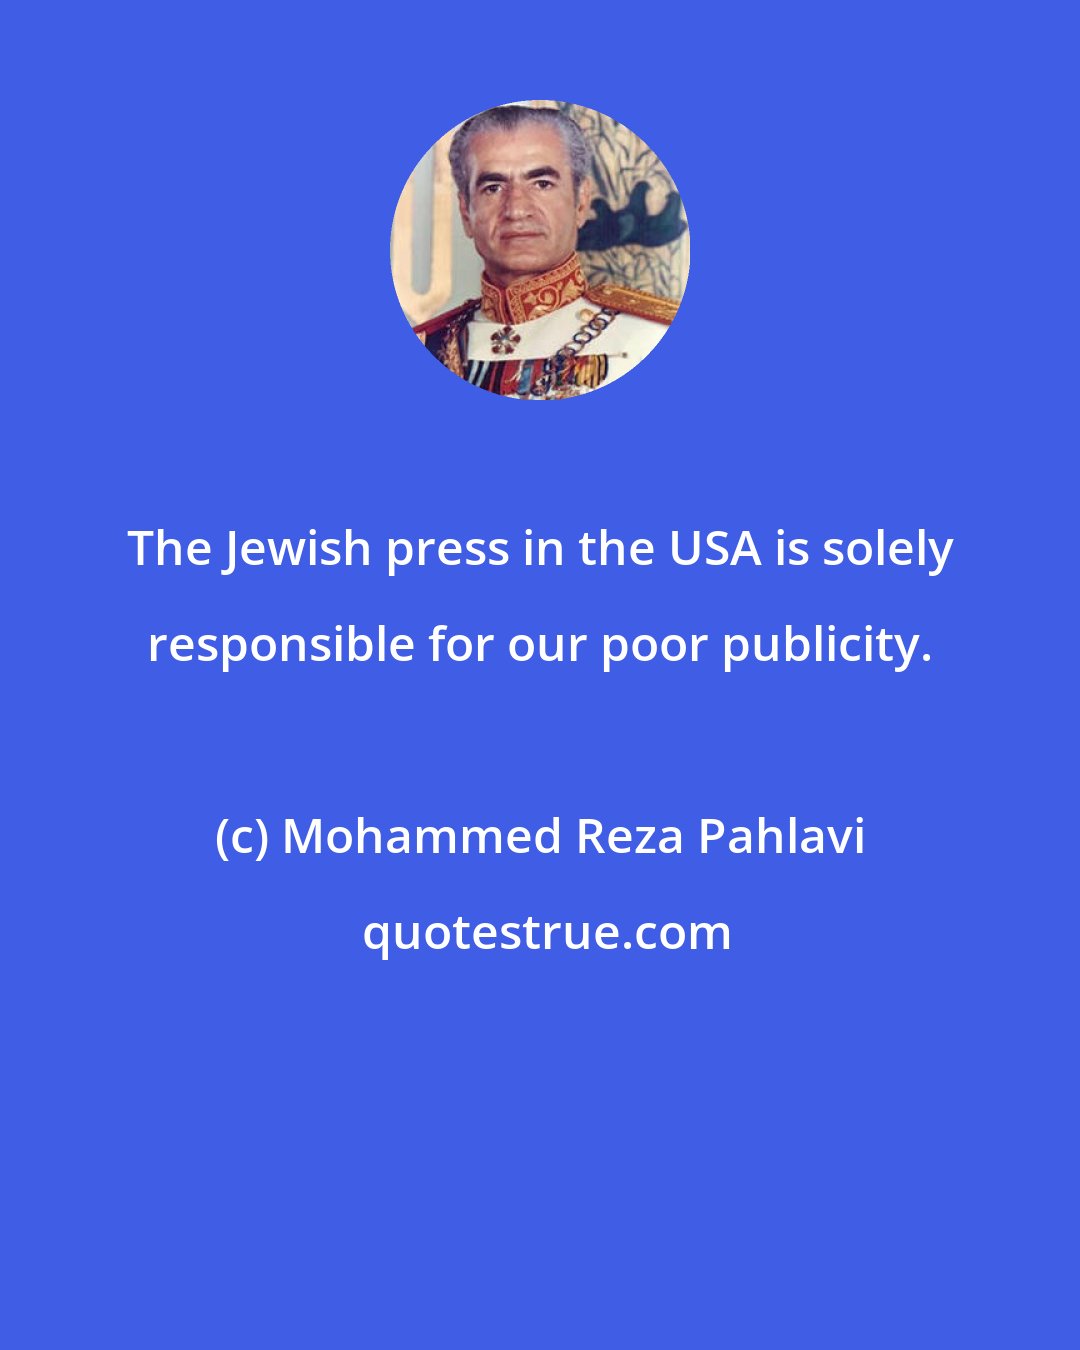 Mohammed Reza Pahlavi: The Jewish press in the USA is solely responsible for our poor publicity.